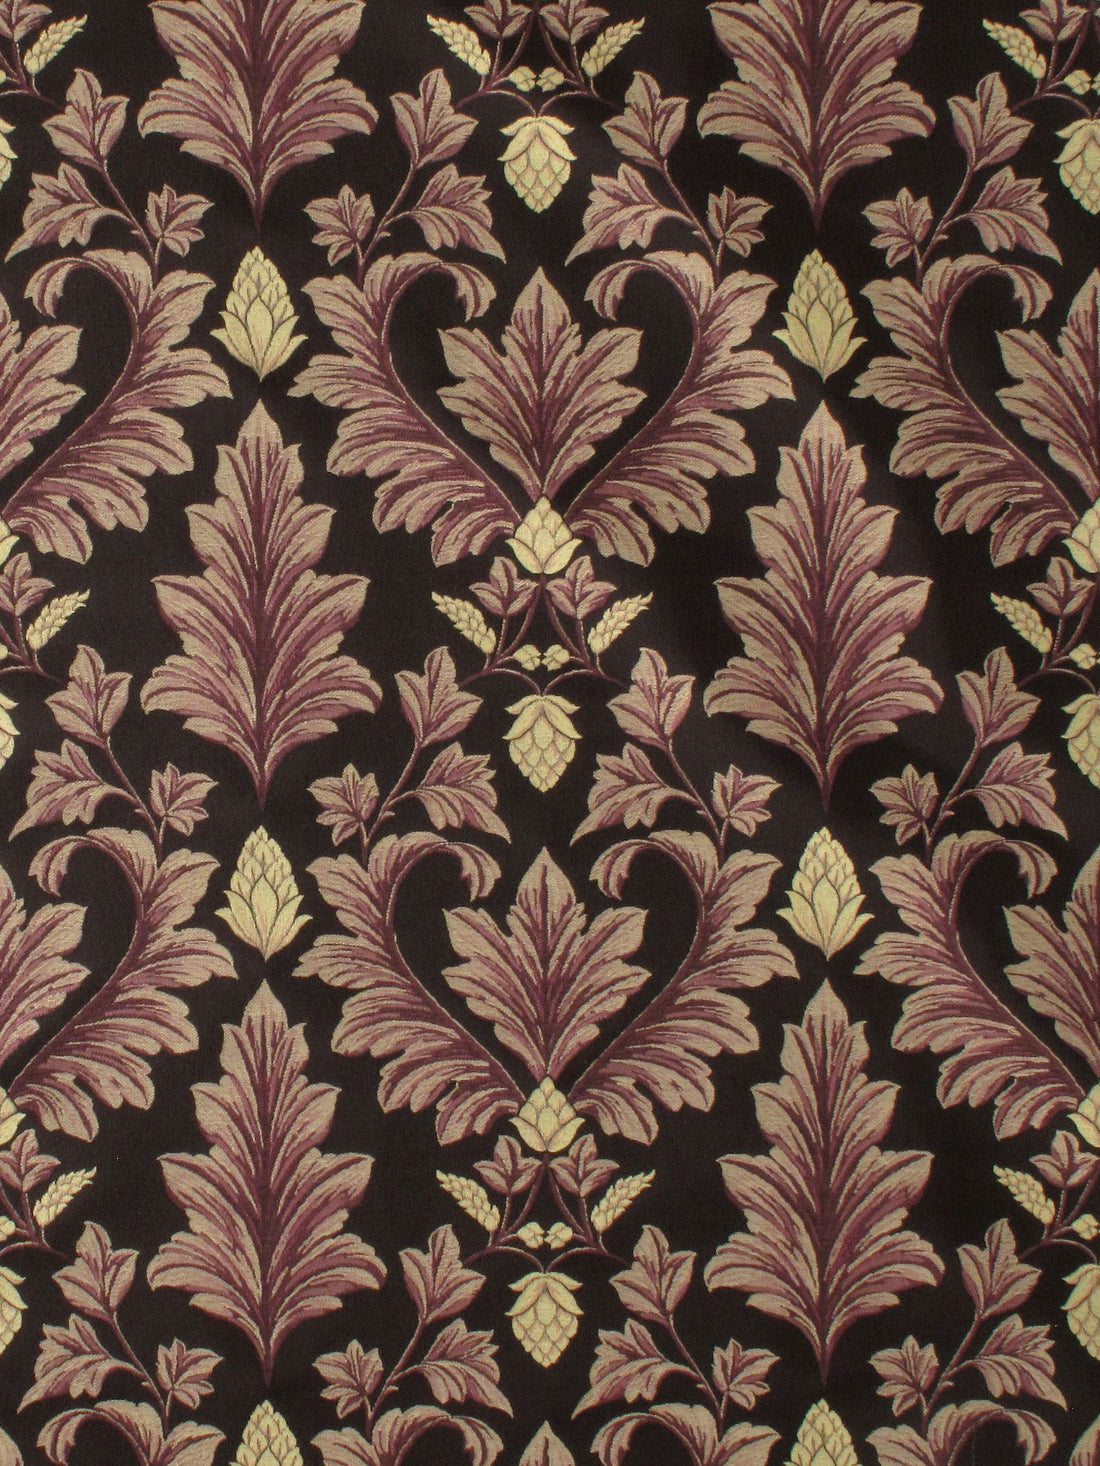 Marquis fabric in aubergine color - pattern number D1 00051408 - by Scalamandre in the Old World Weavers collection